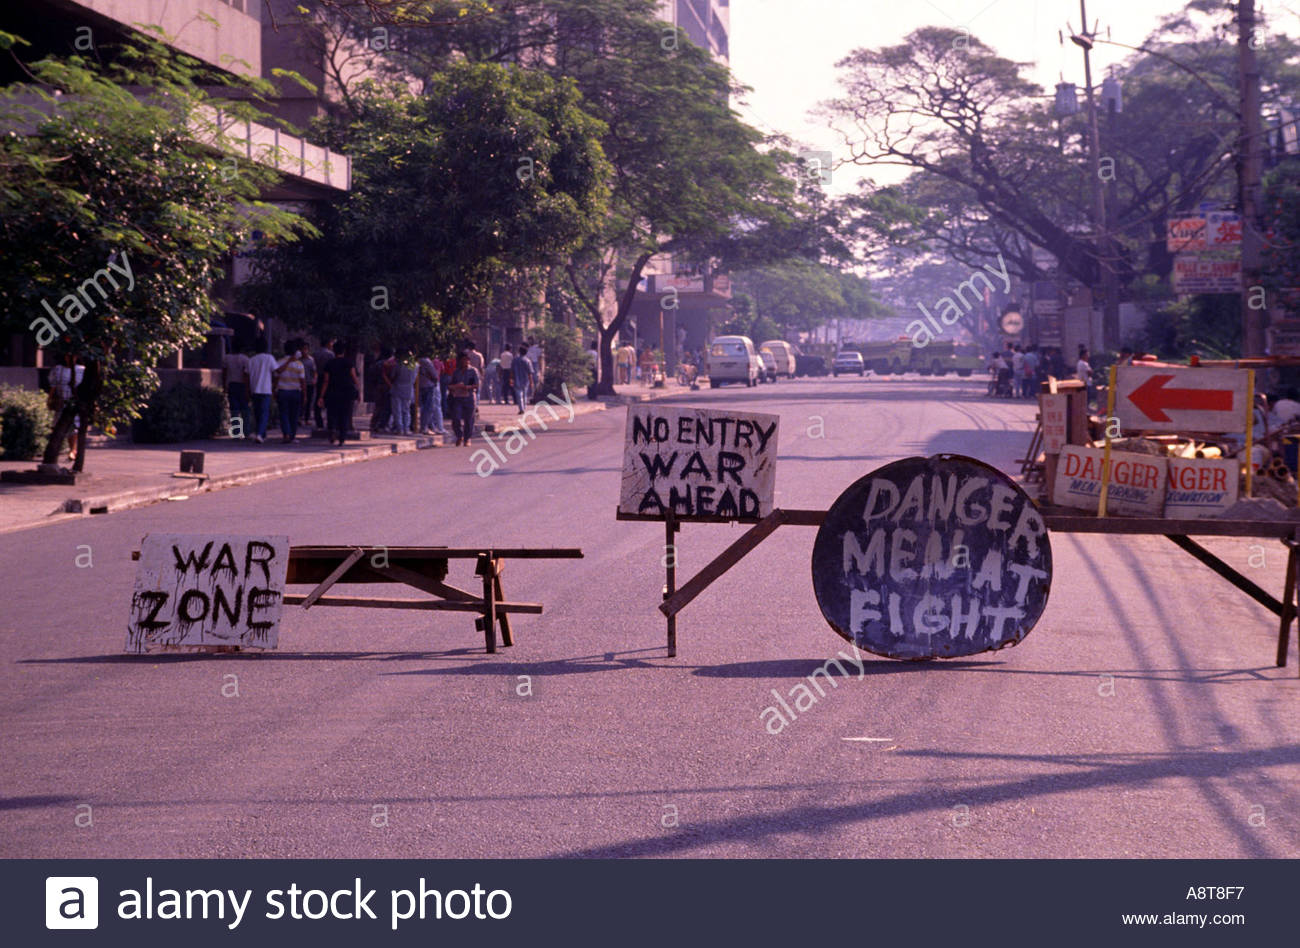 temporary-road-signs-1989-coup-attempt-makati-manila-philippines-A8T8F7.jpg